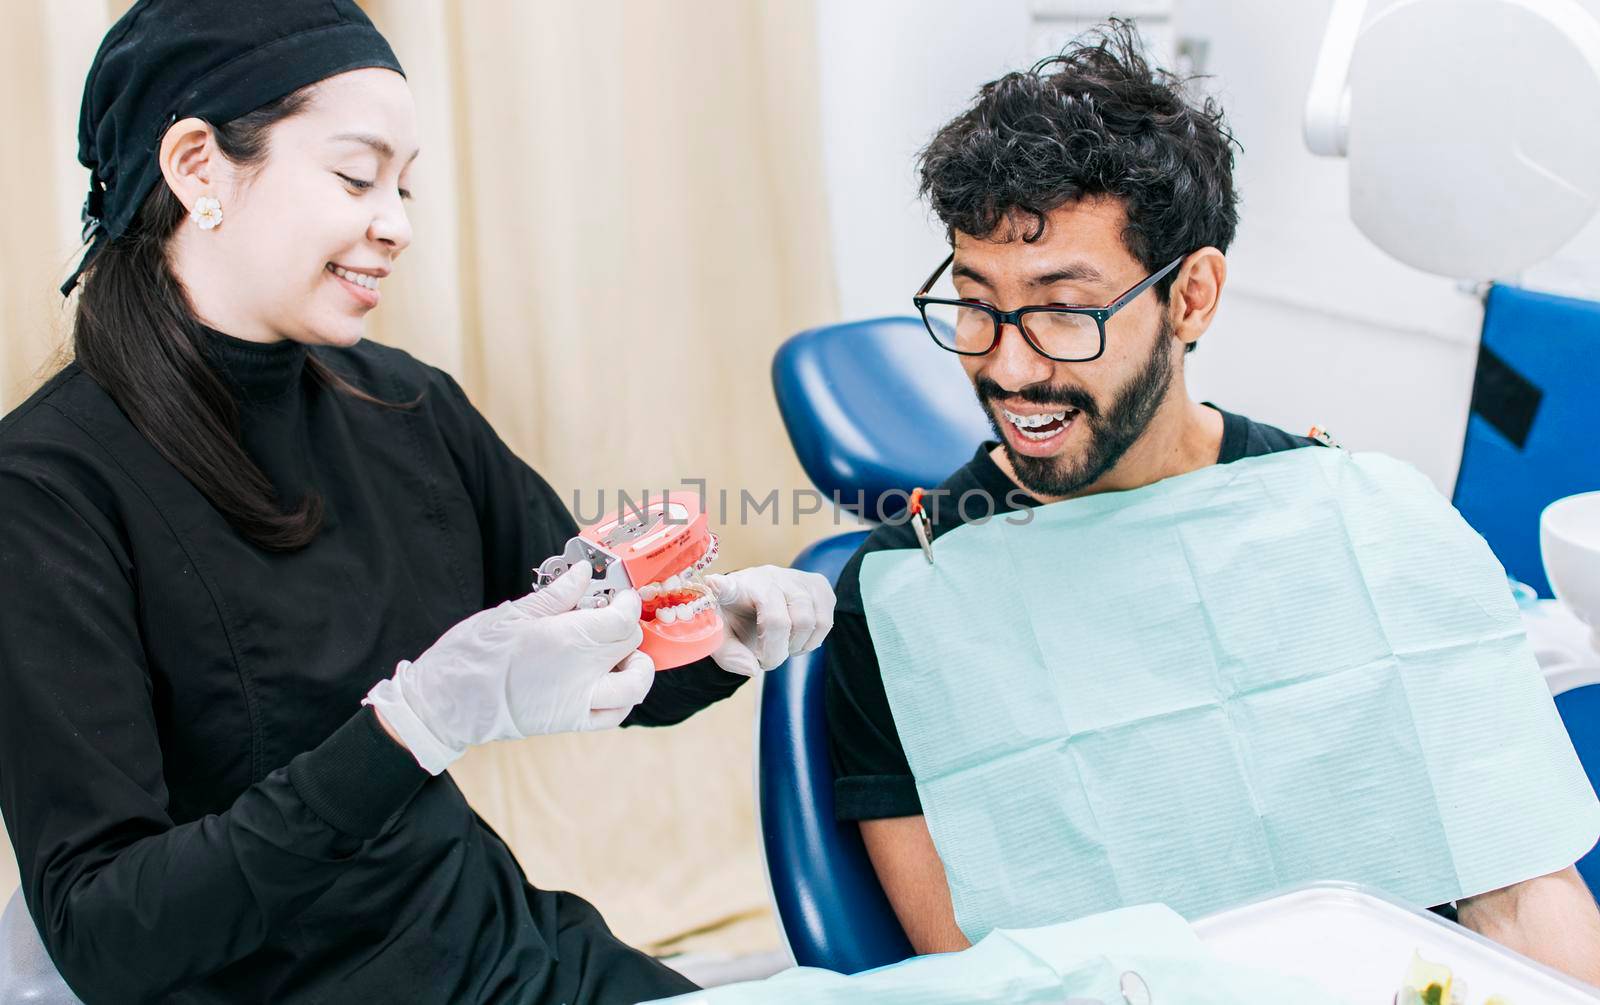 Dentist with patient showing a denture, dentist pointing out a denture to a patient, dentist explaining dental hygiene to a patient